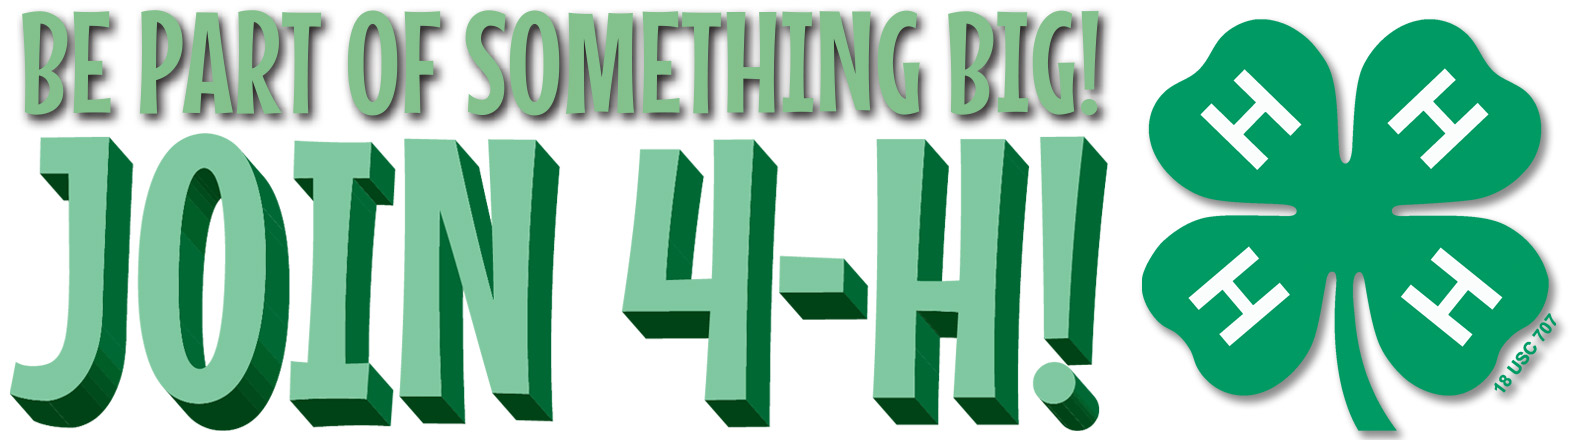 Be part of something big: Join 4-H!